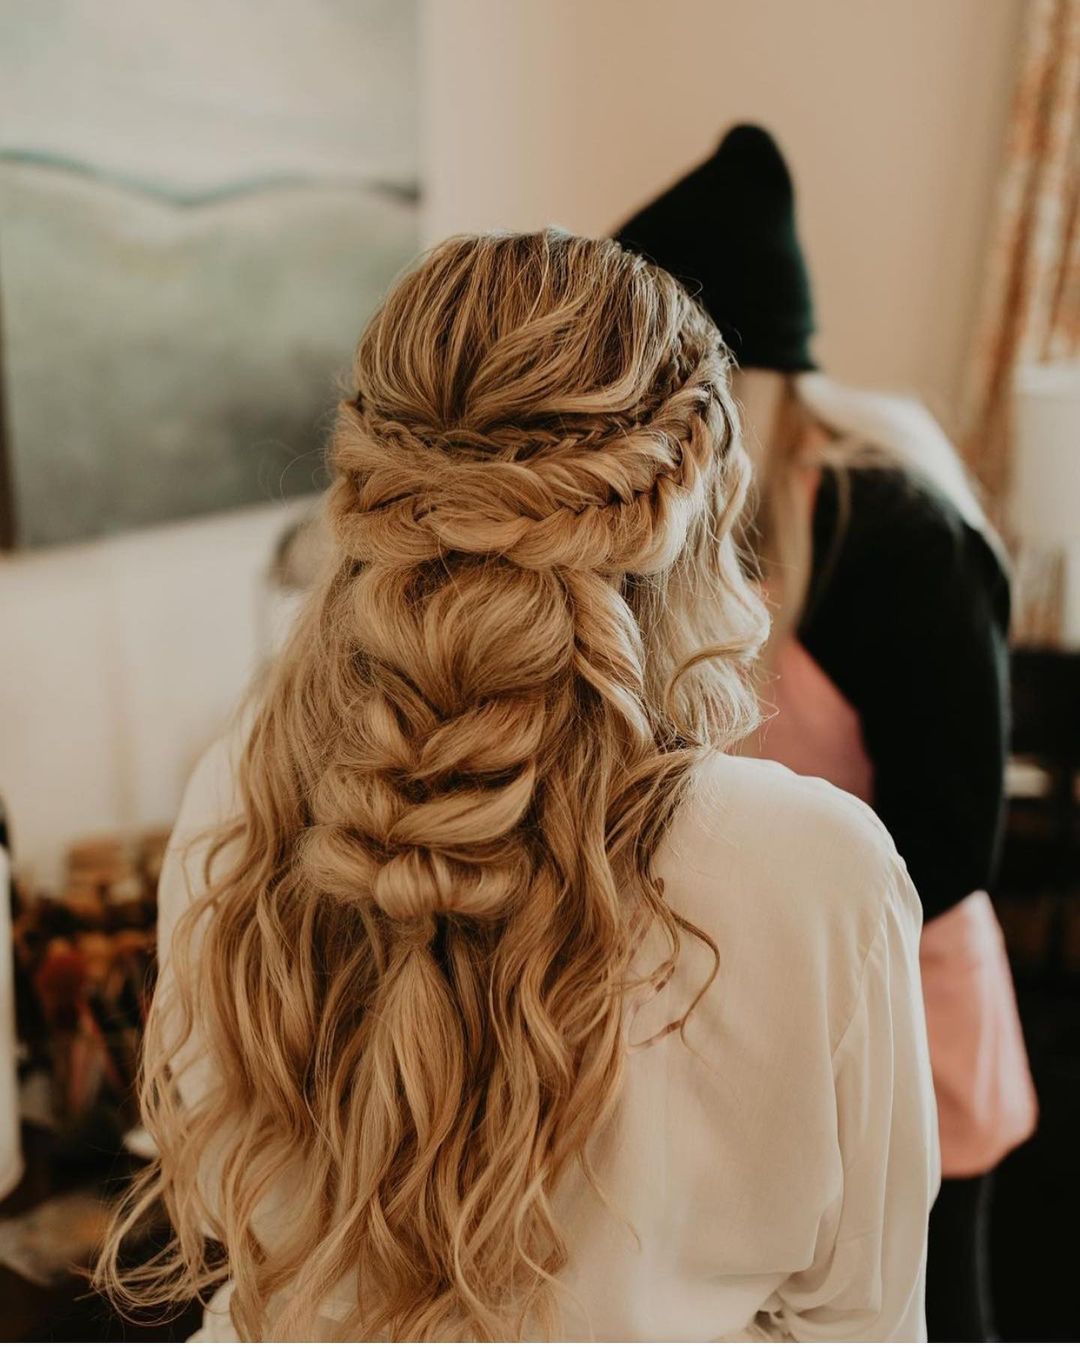 Half Textured Braided French Hair with Waves